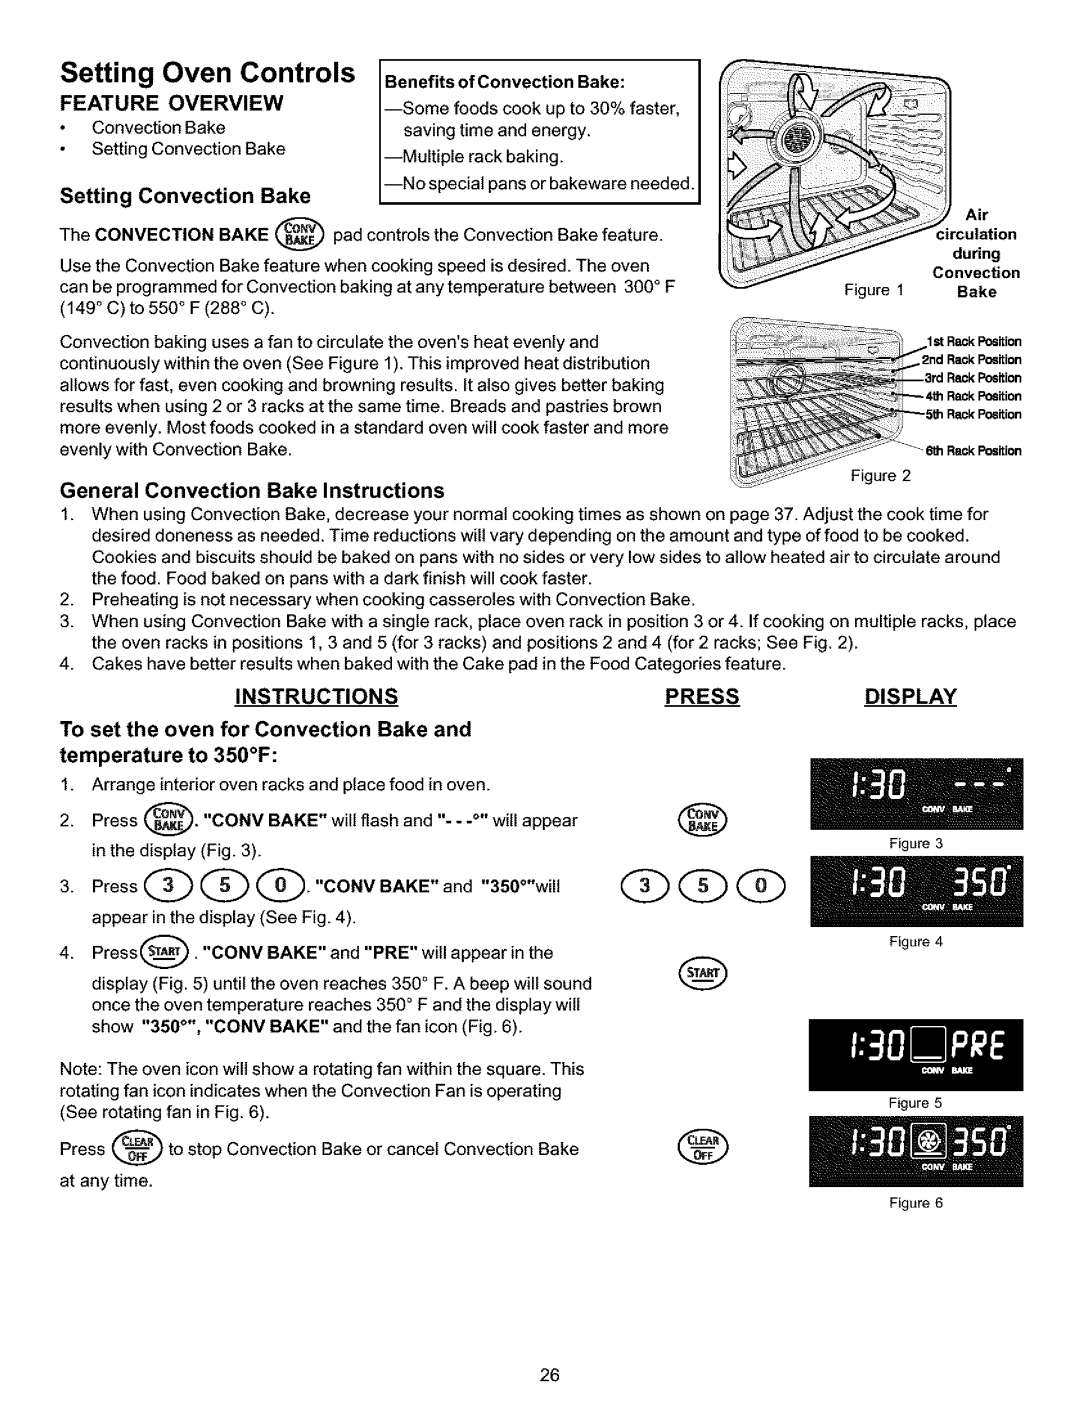 Kenmore 790.99014 Setting Oven Controls, Setting Convection Bake, General Convection Bake Instructions, Press, Display 